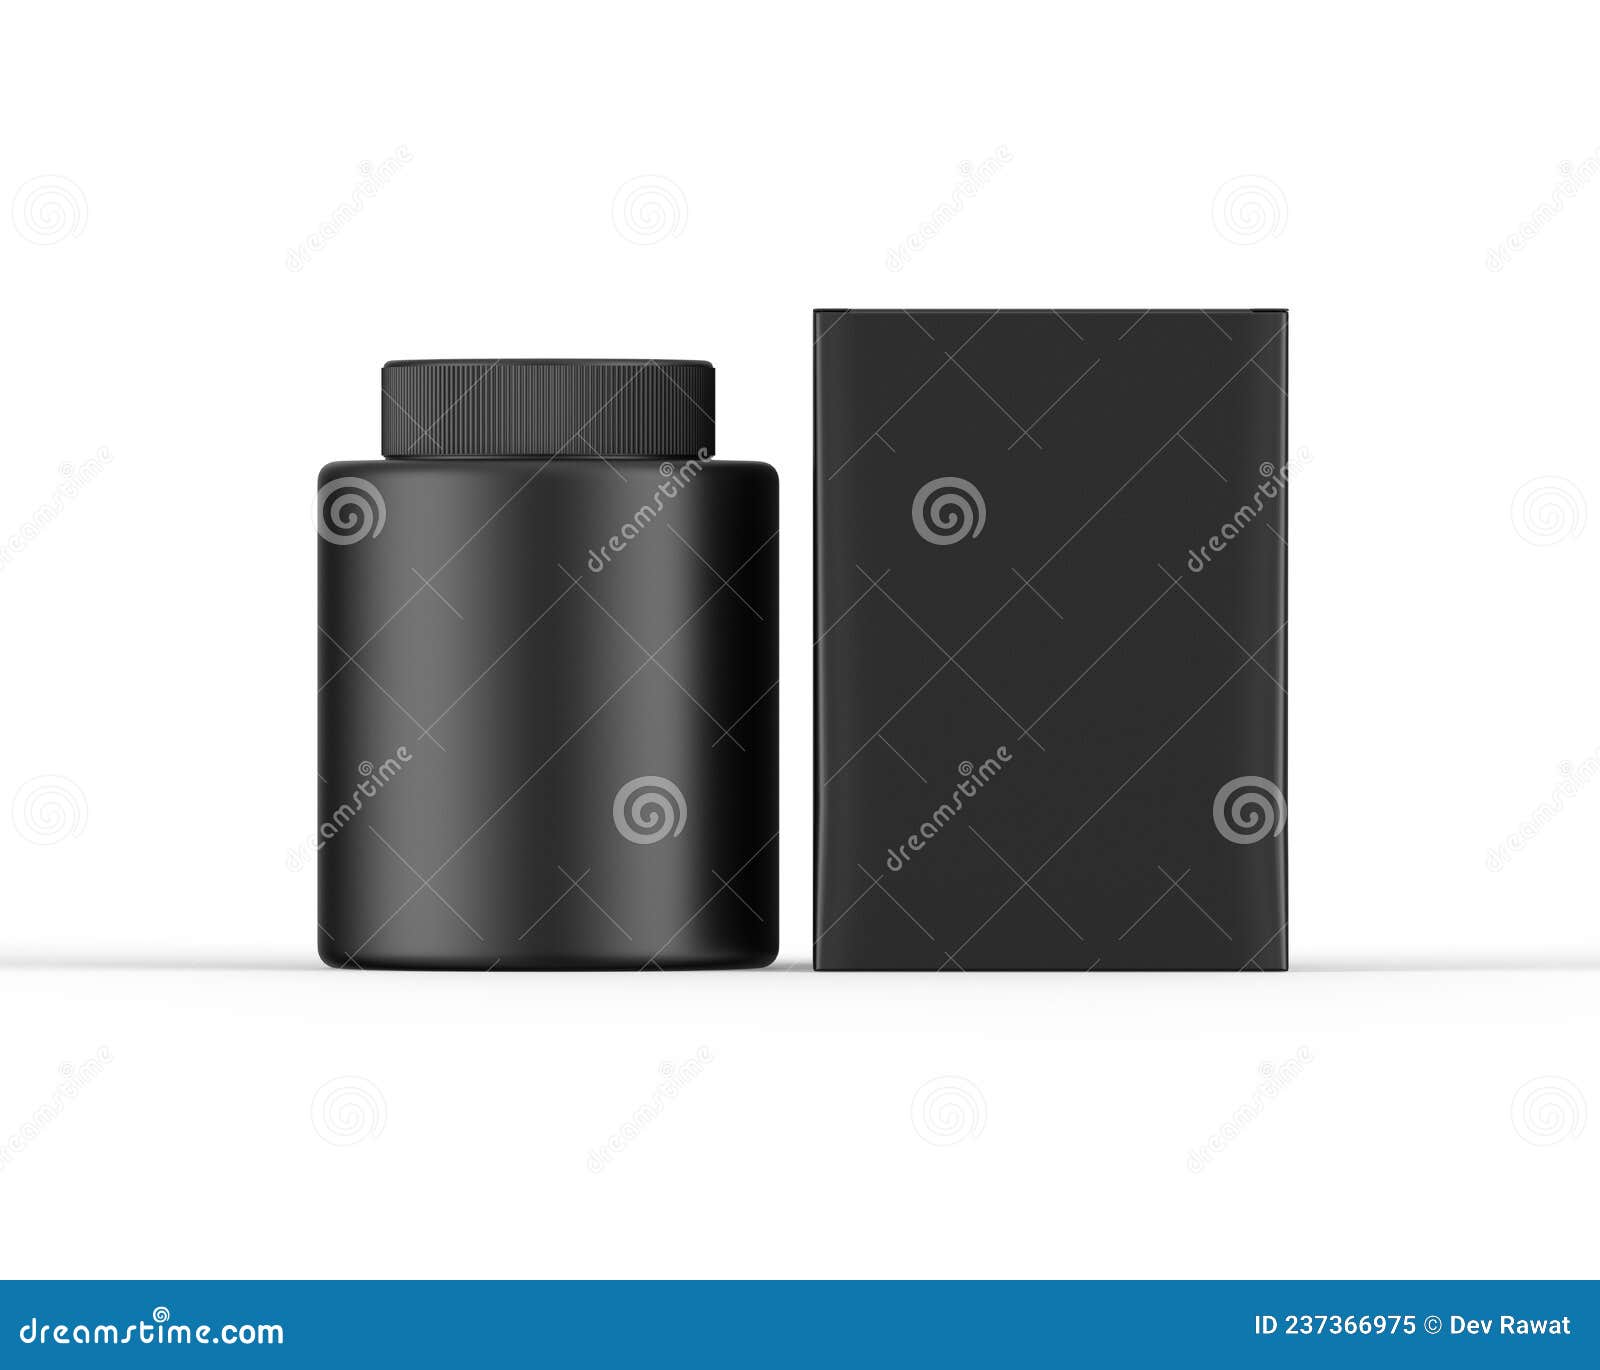 https://thumbs.dreamstime.com/z/sport-nutrition-whey-protein-gainer-black-plastic-jars-shaker-isolated-white-background-black-empty-screw-top-front-237366975.jpg